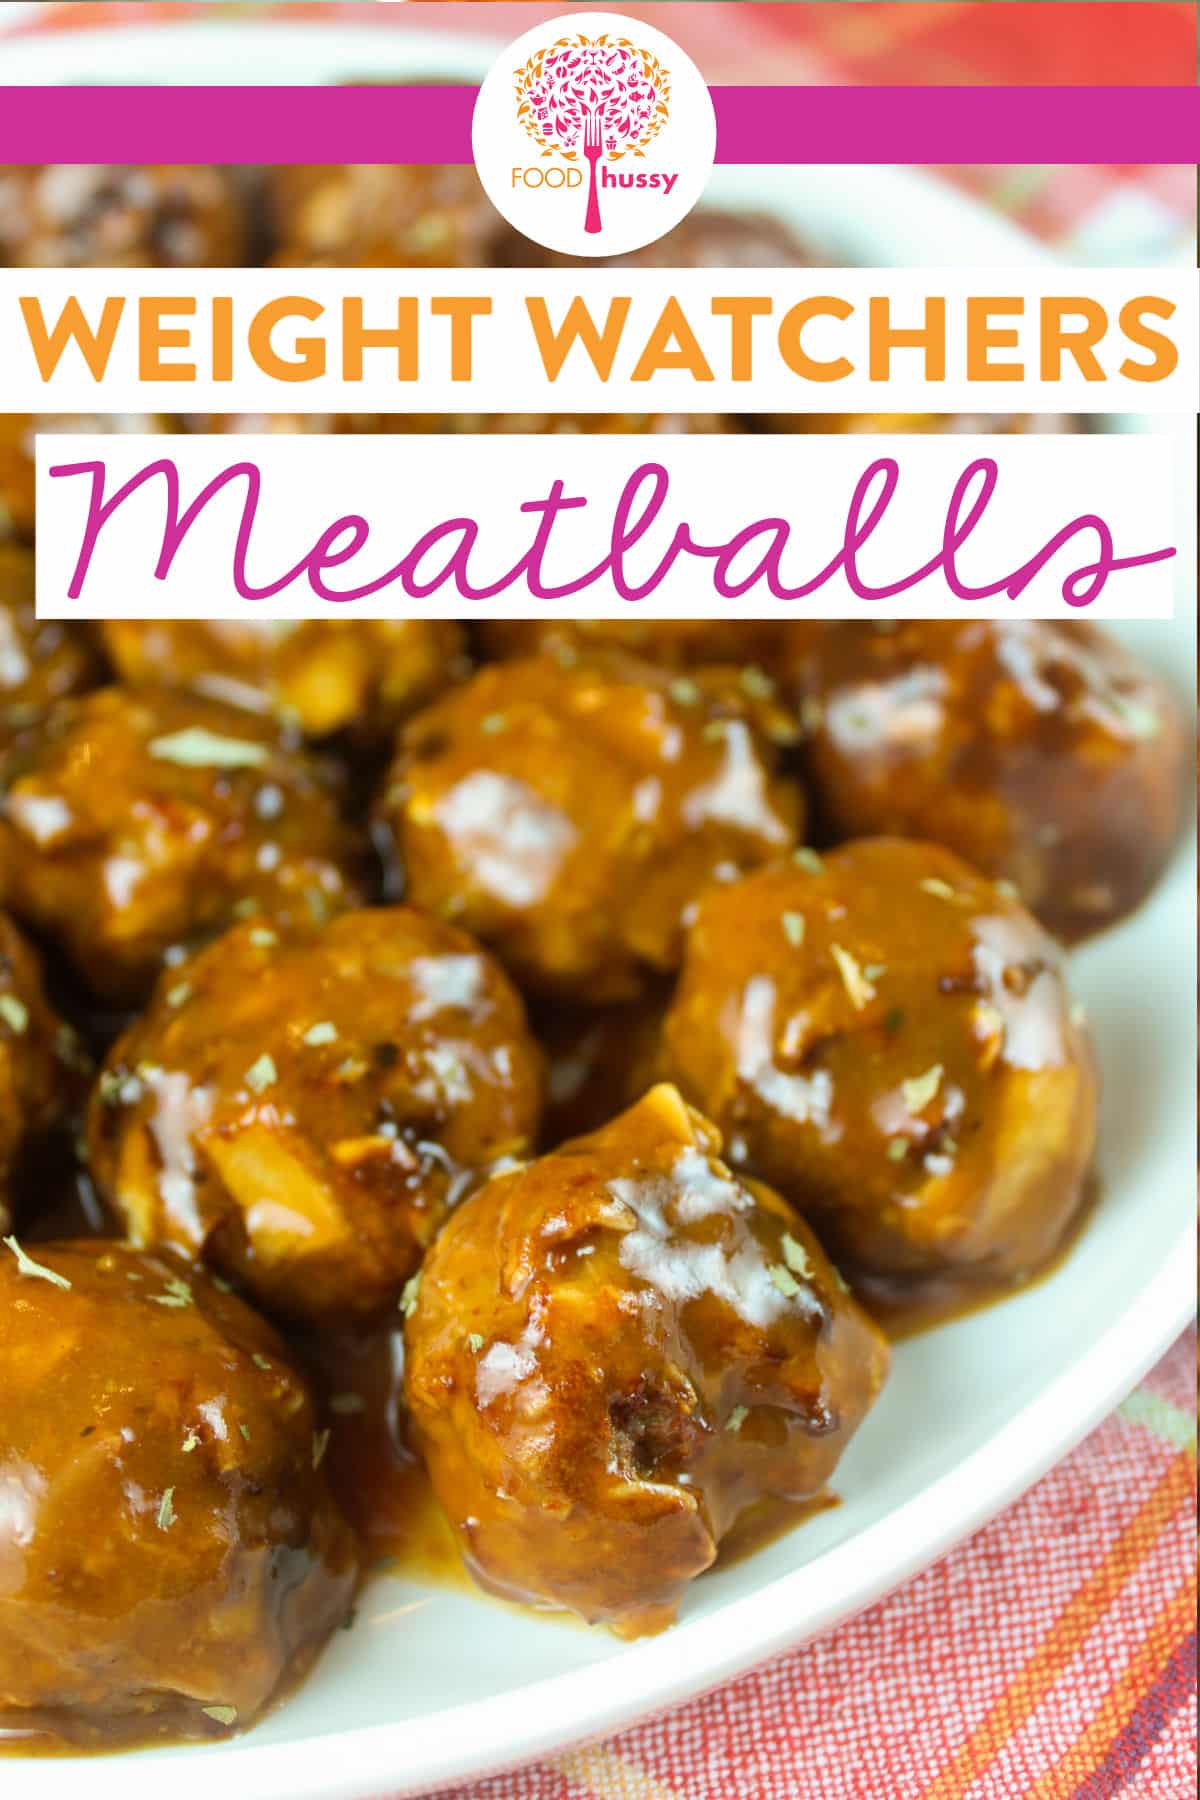 These Weight Watchers Meatballs are super healthy but still delicious! You wouldn't think something like BBQ Meatballs could be healthy! We used ground turkey and oats along with garlic and red pepper flakes to make these low points & tasty!  via @foodhussy